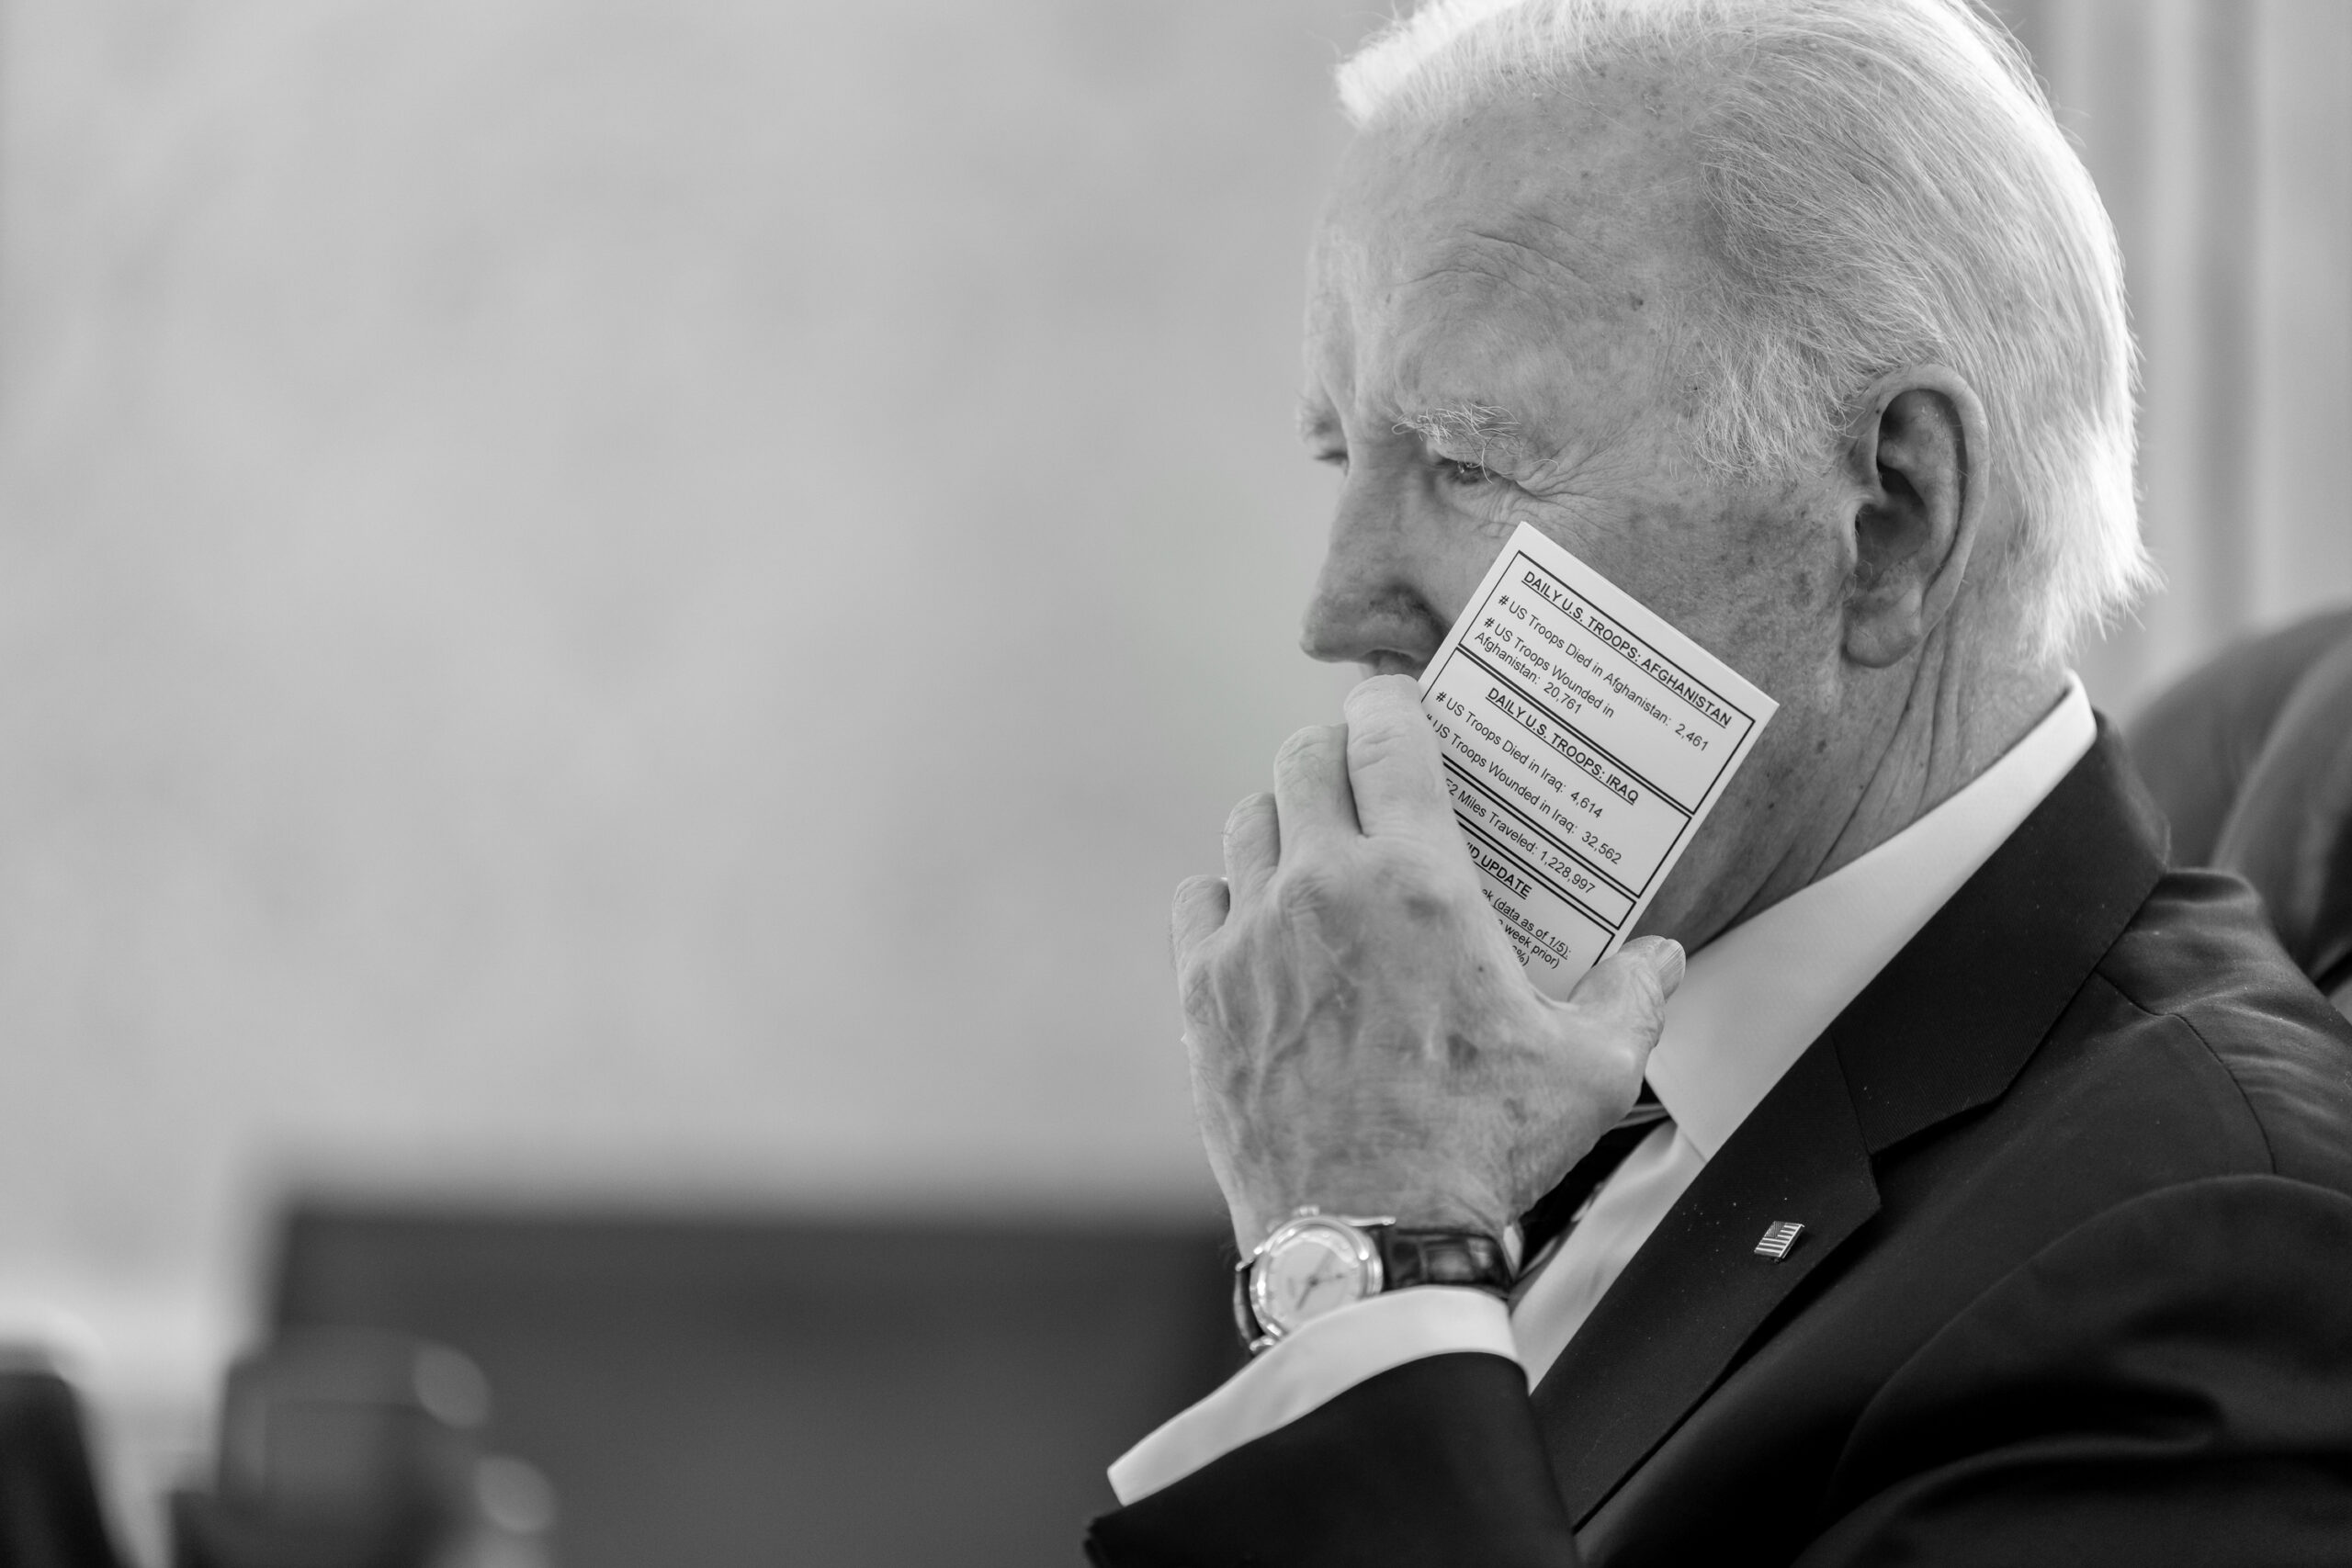 WaPo Propagandists Warn Of ‘Potential Future Oldest President’ Trump Even Though Biden Will Be Older